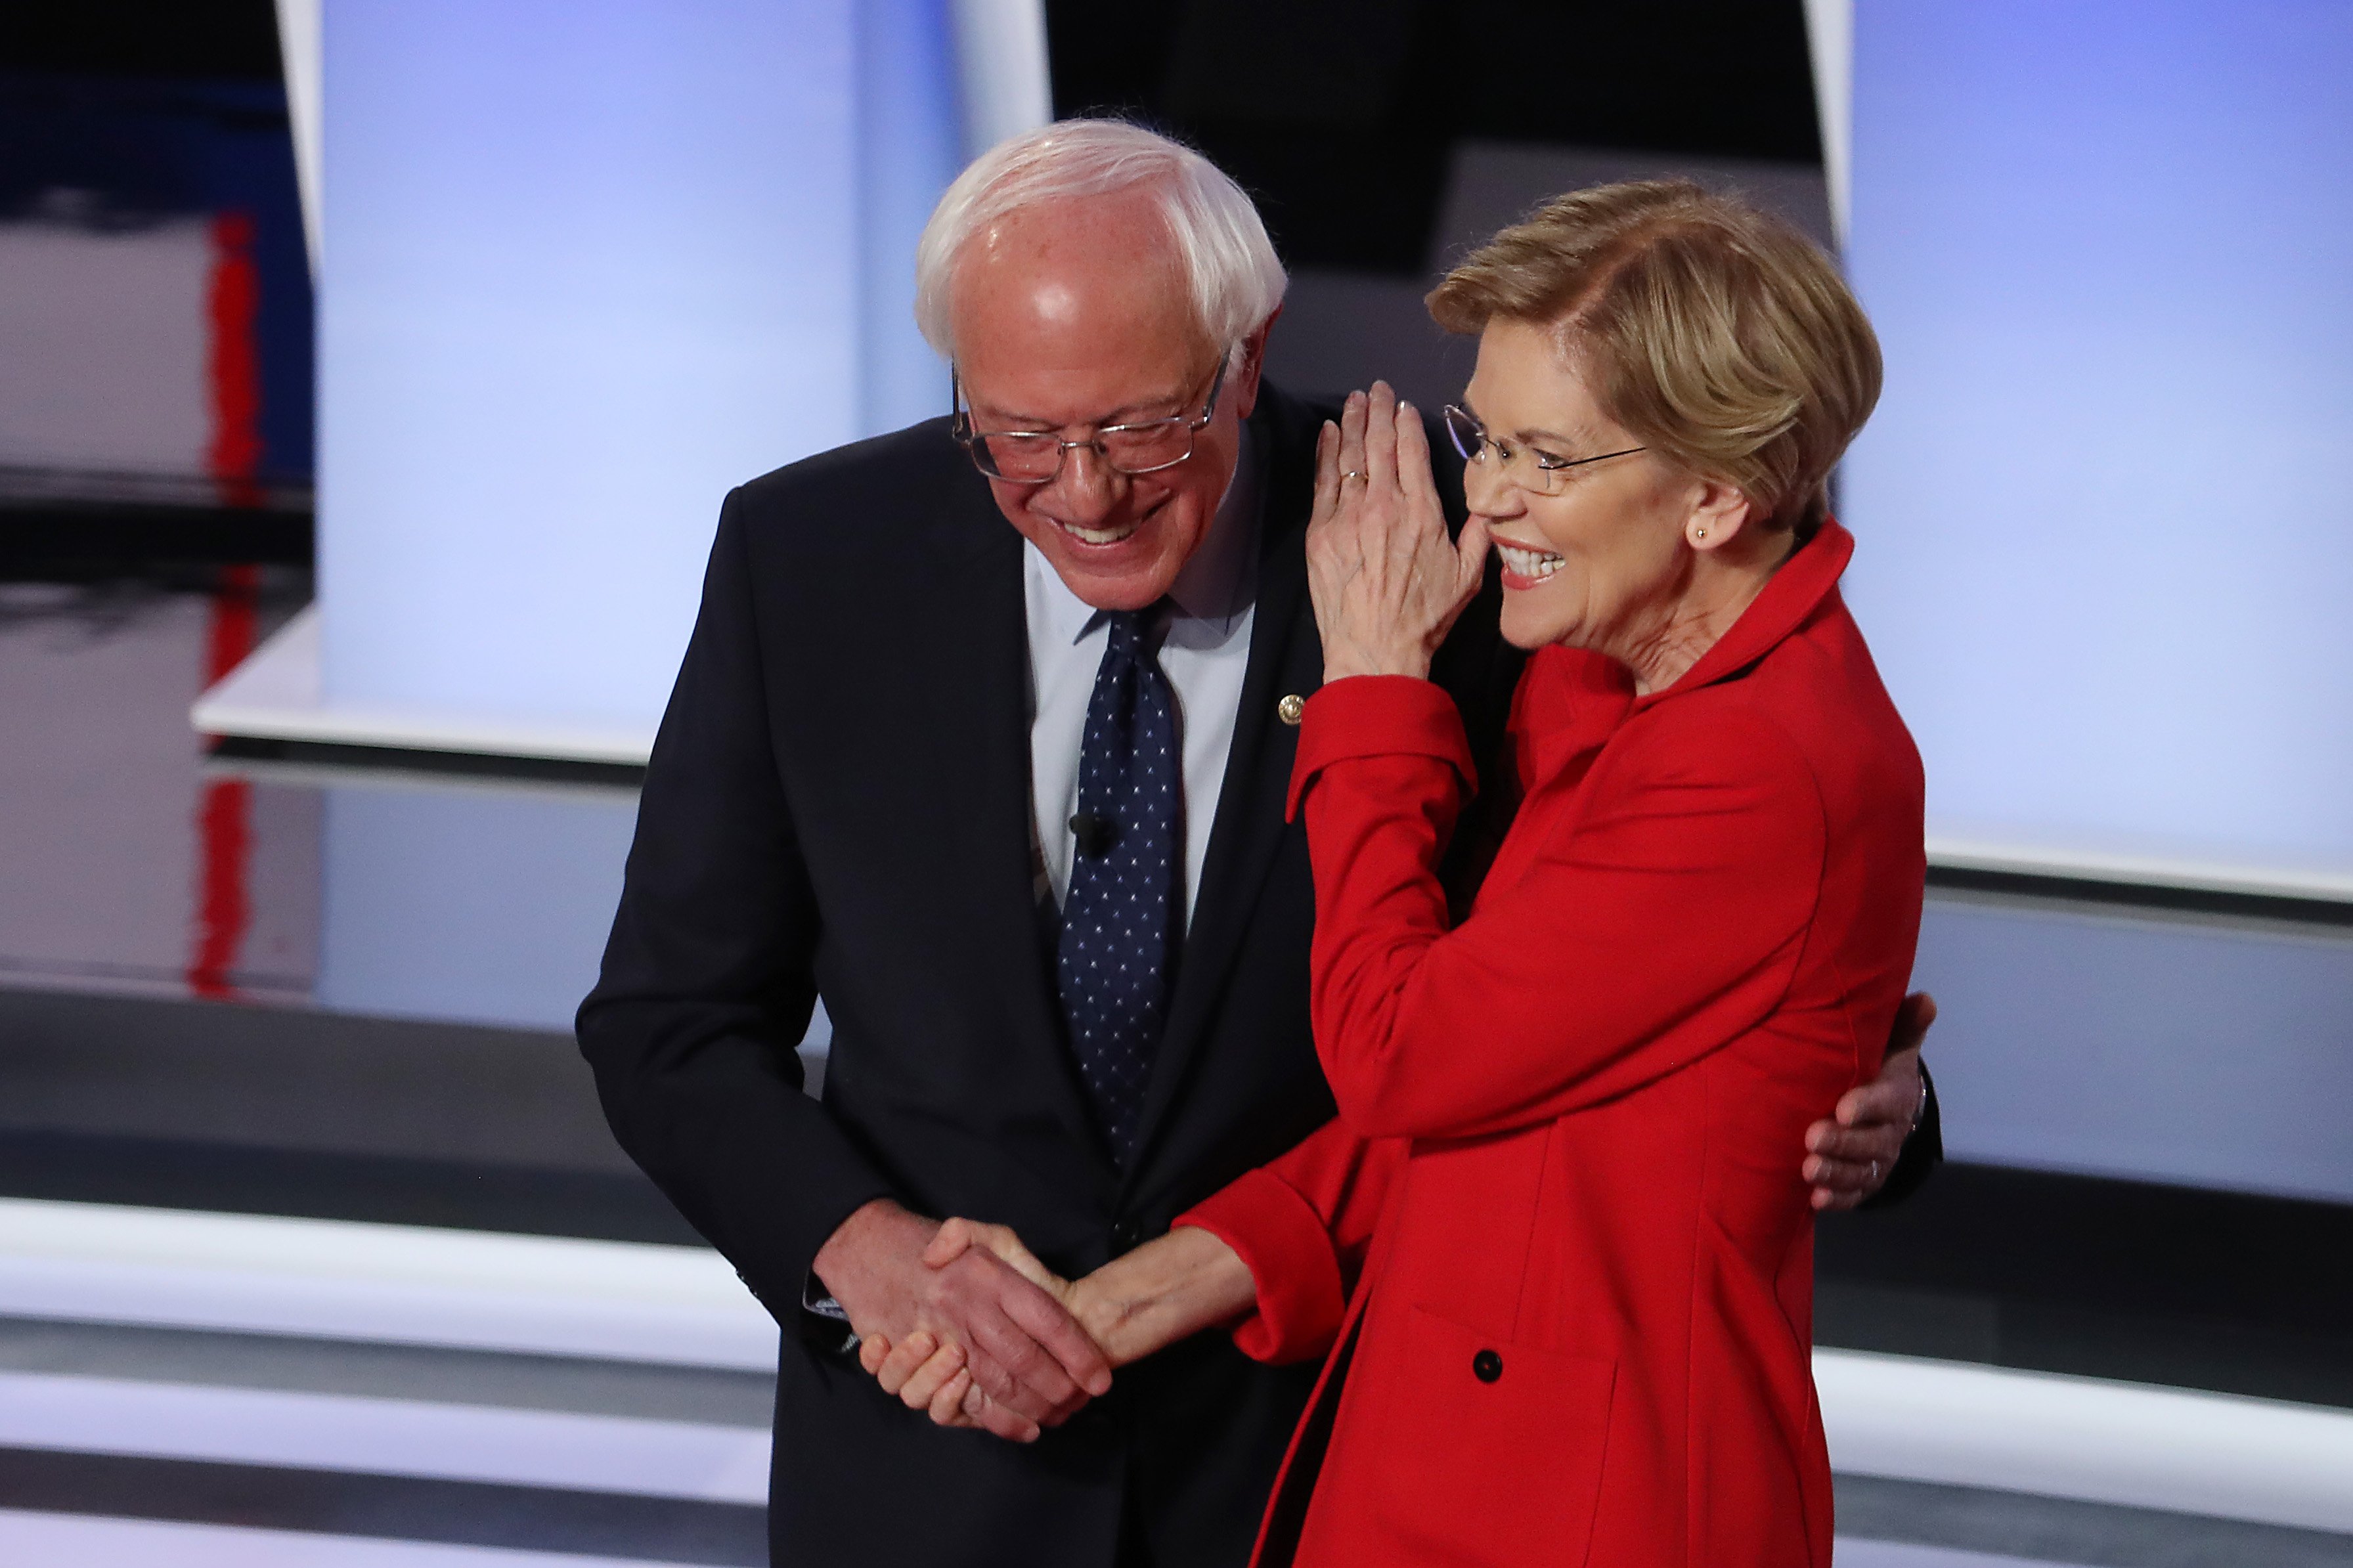 DETROIT, MICHIGAN - JULY 30: Democratic presidential candidate Sen. Bernie Sanders (I-VT) (R) and Sen. Elizabeth Warren (D-MA) greet each other at the start of the Democratic Presidential Debate at the Fox Theatre July 30, 2019 in Detroit, Michigan. 20 Democratic presidential candidates were split into two groups of 10 to take part in the debate sponsored by CNN held over two nights at Detroit’s Fox Theatre. (Photo by Justin Sullivan/Getty Images)